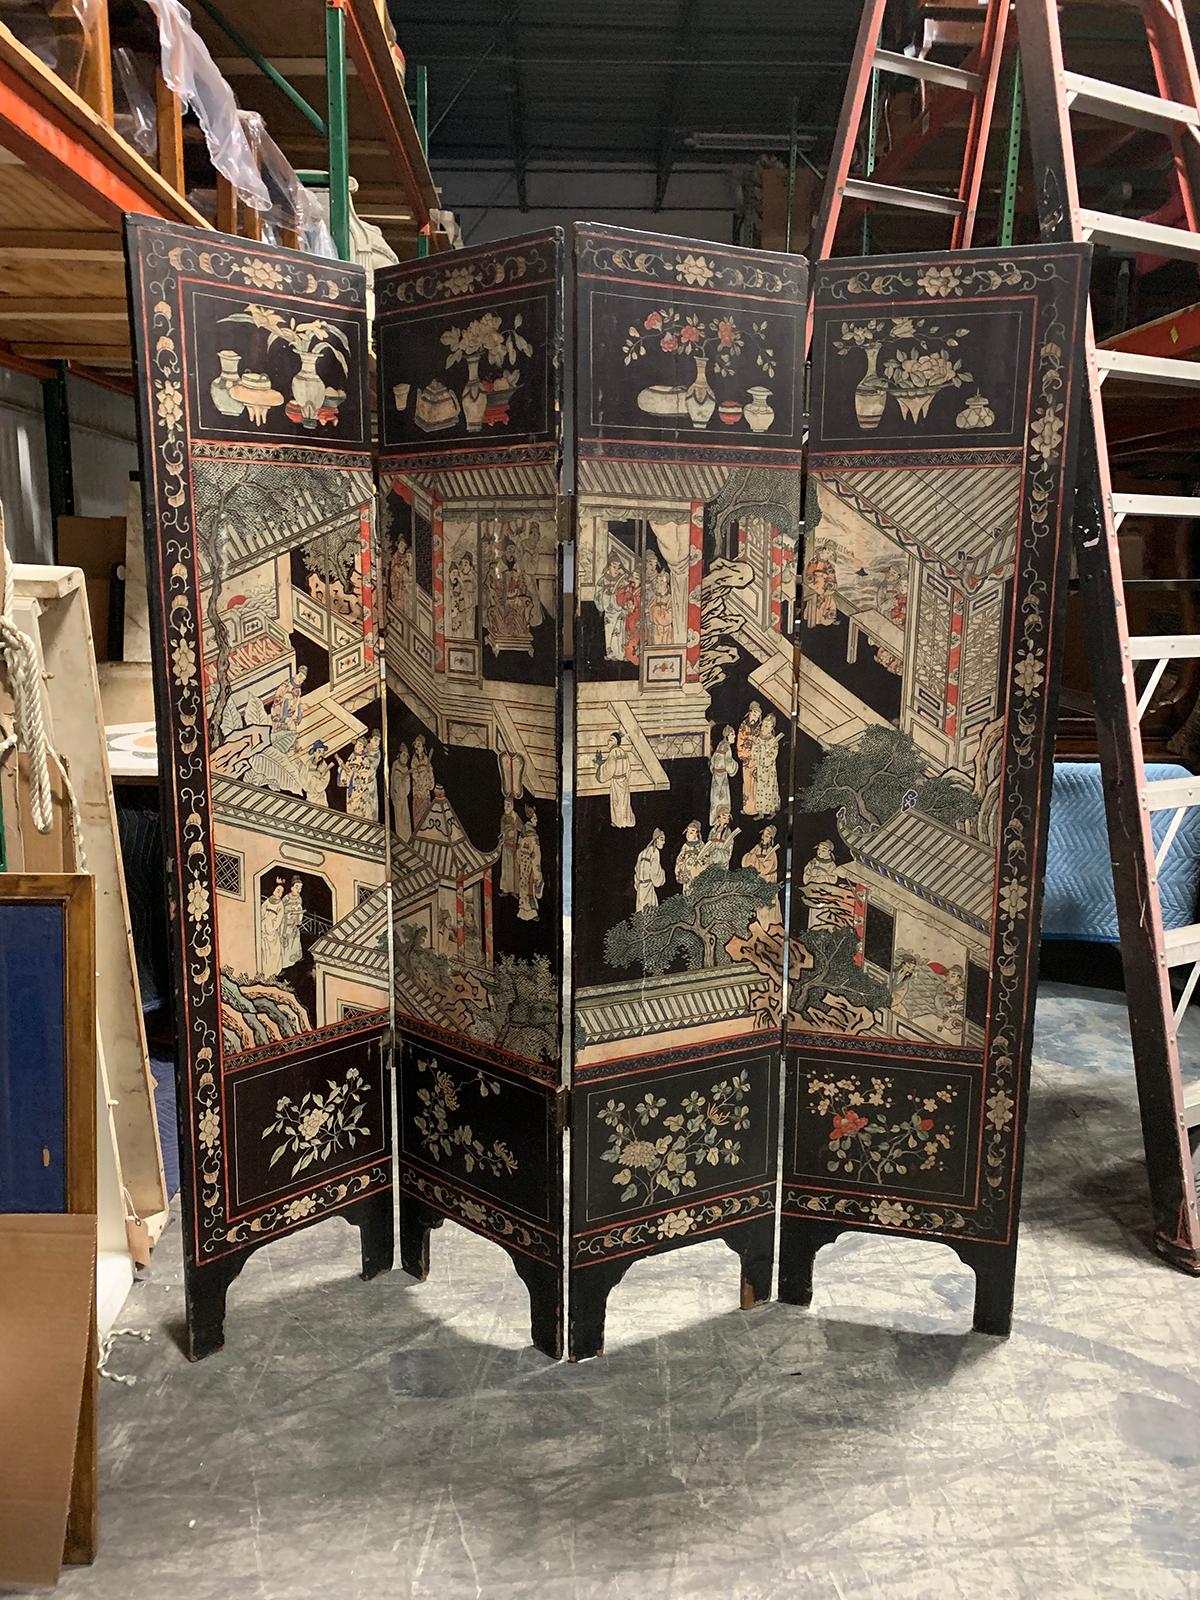 19th century coromandel four-panel screen
**Main photo shows the front and back - this is ONE screen
Each panel measures:16